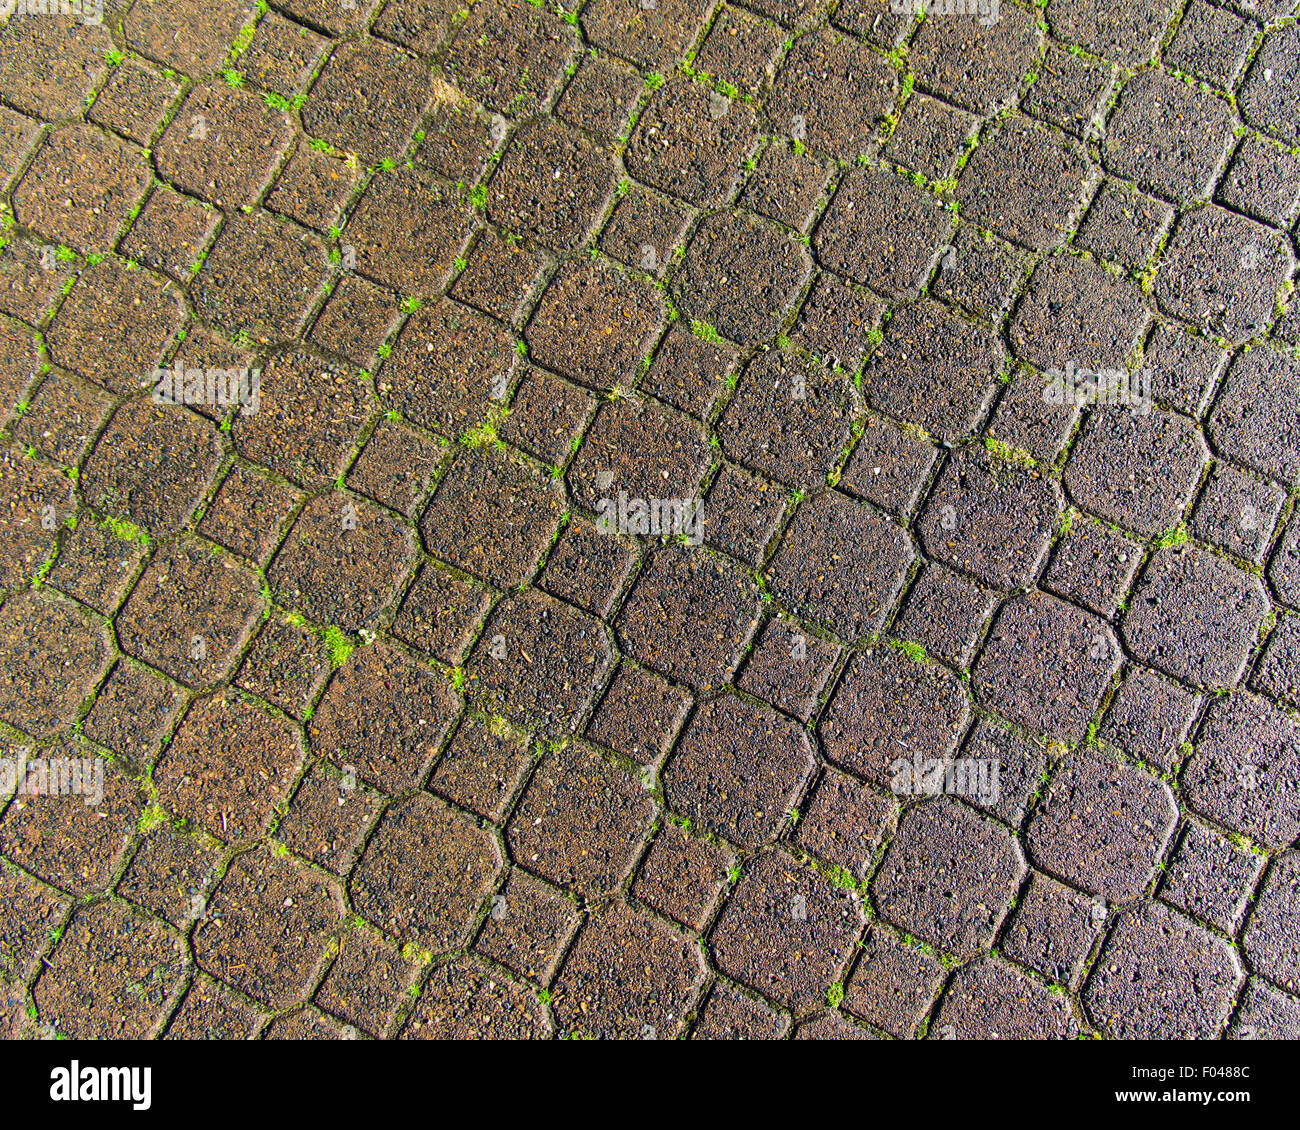 Paver stones form a patterned walk Stock Photo